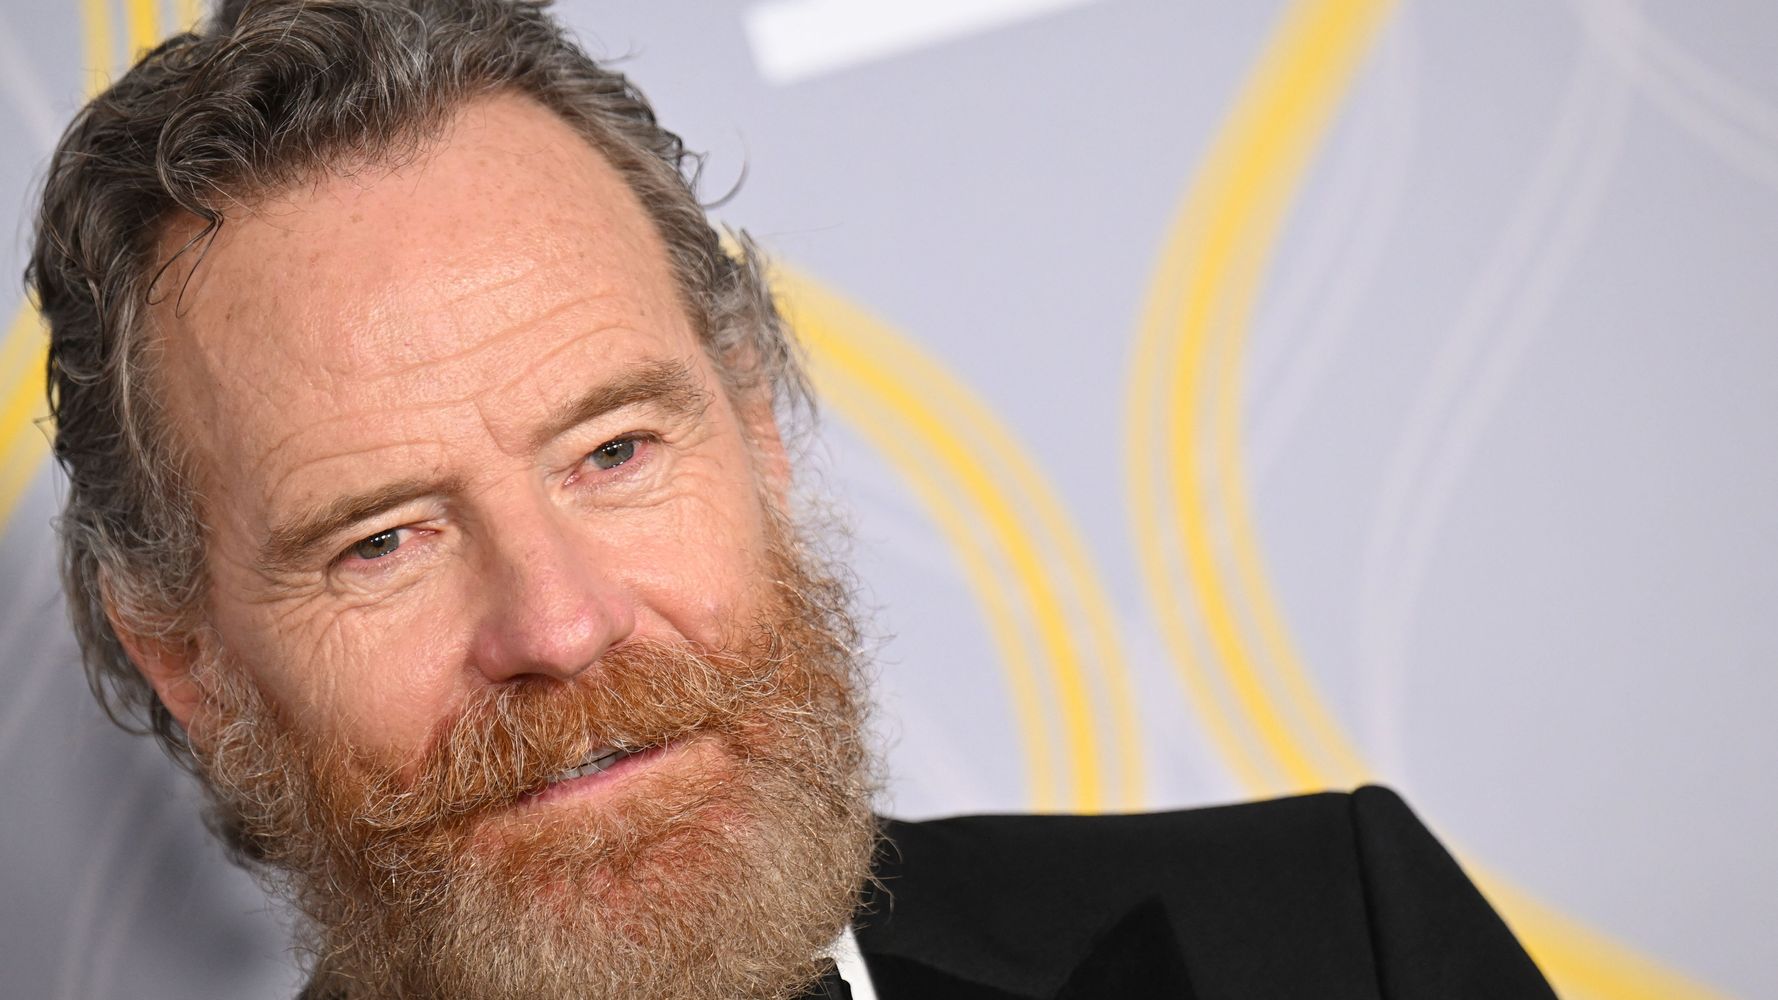 Bryan Cranston Has A New Look And Twitter Is Loving It